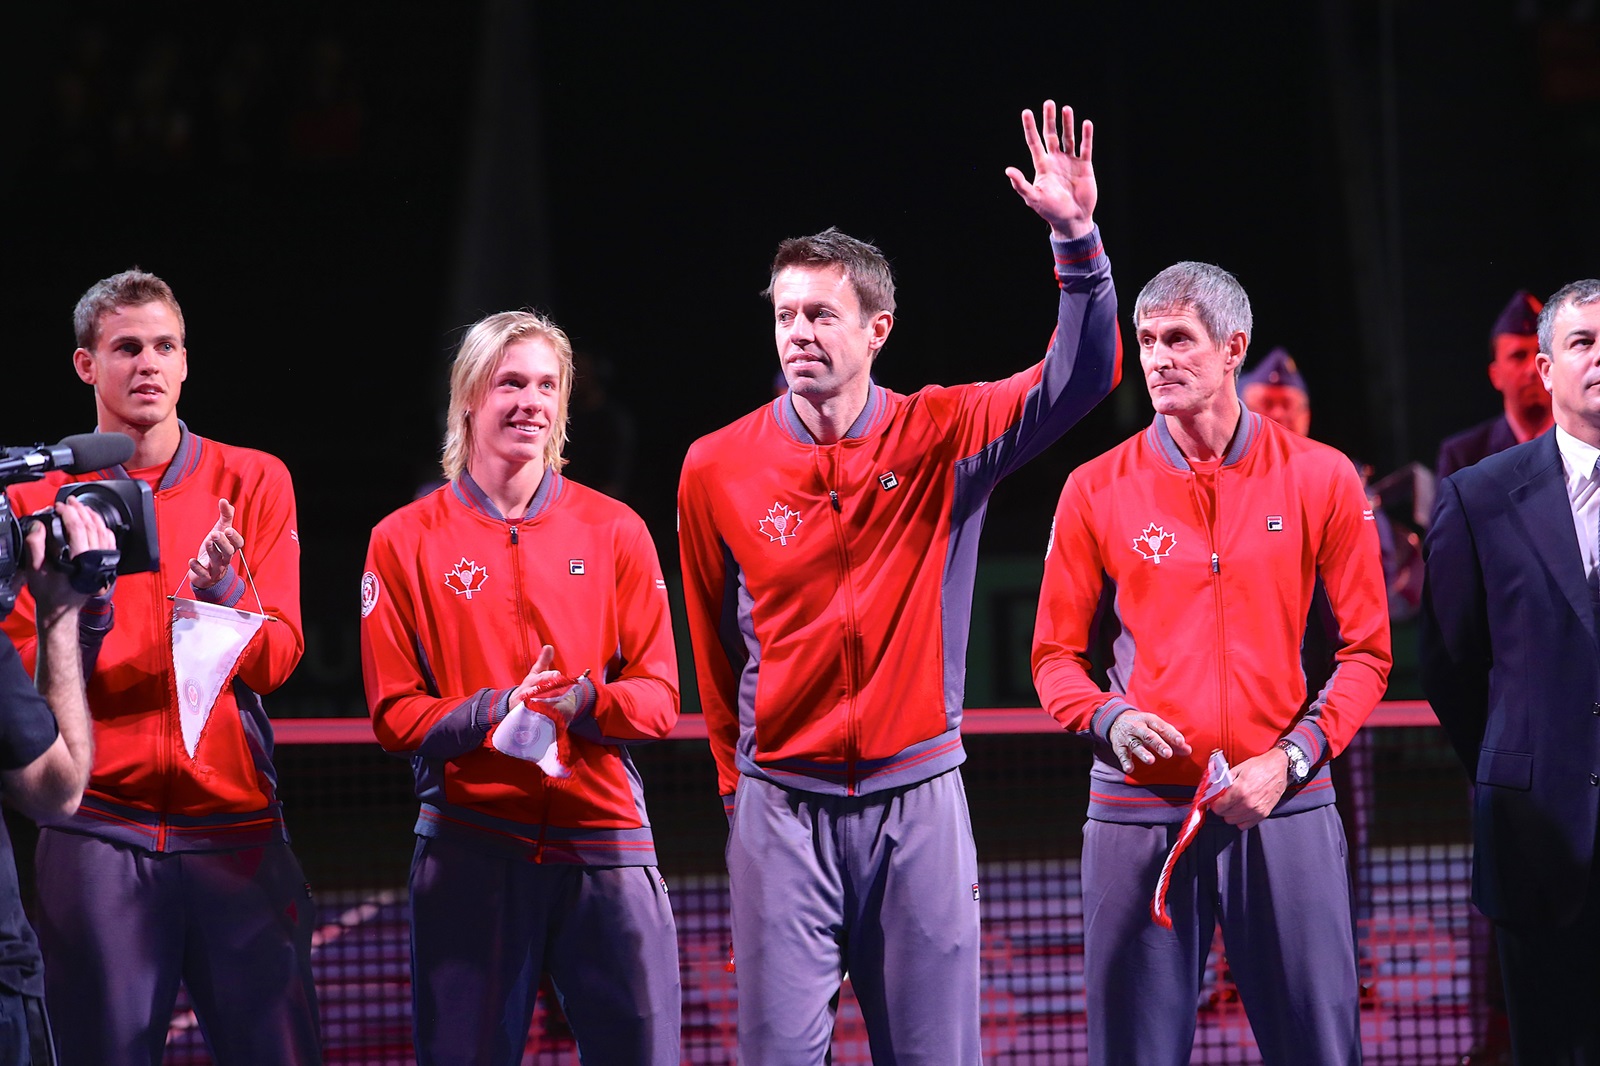 Induction of Daniel Nestor into the Canadian Sports Hall of Fame